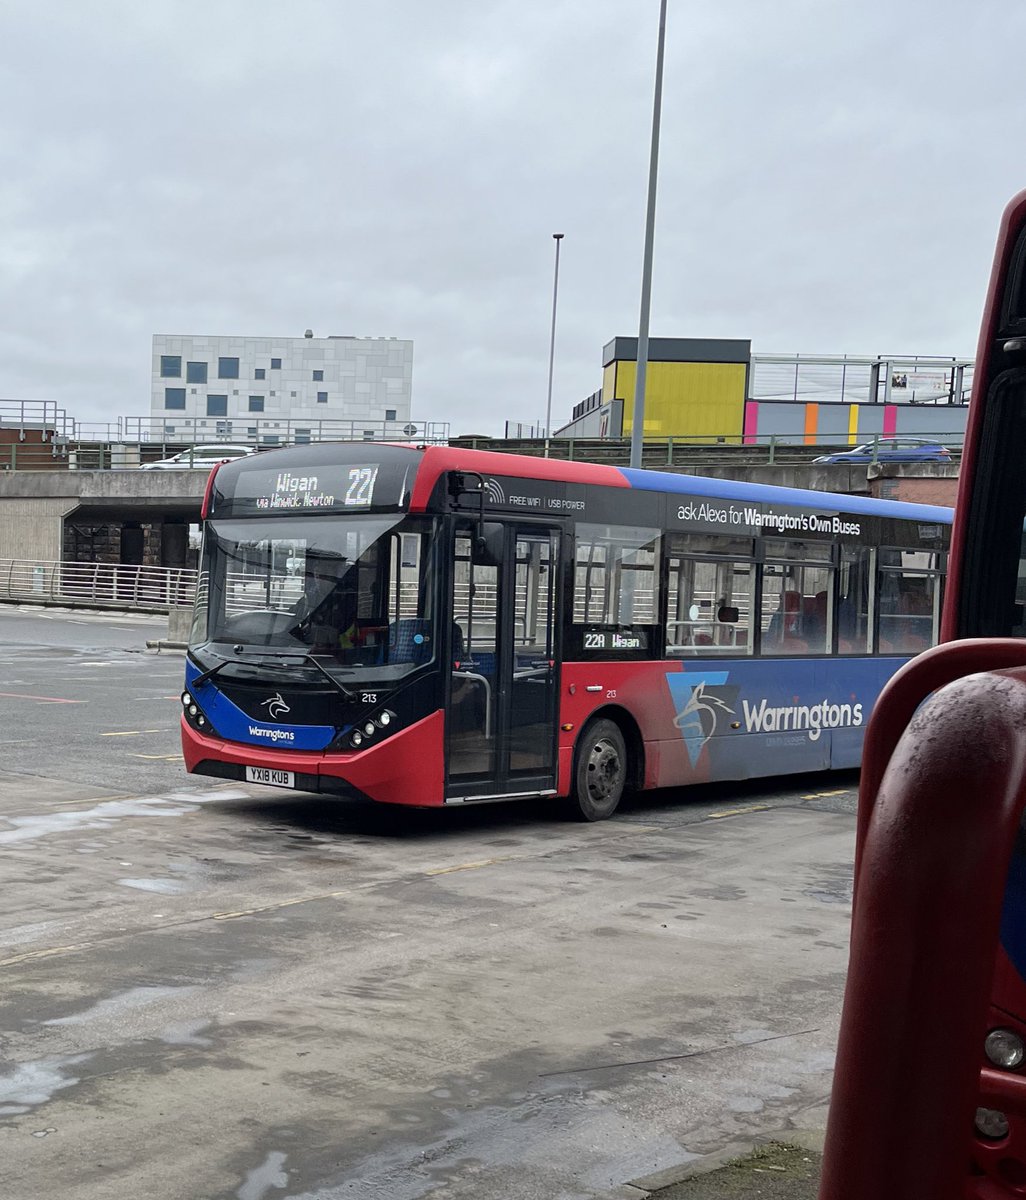 …and I’m off (very promptly!) on the 22A to Wigan by @WarringtonBuses Nice that this is also a £2 fare too - getting my money’s worth with this route as it’ll take just over an hour to get to Wigan. #EveryBusGM